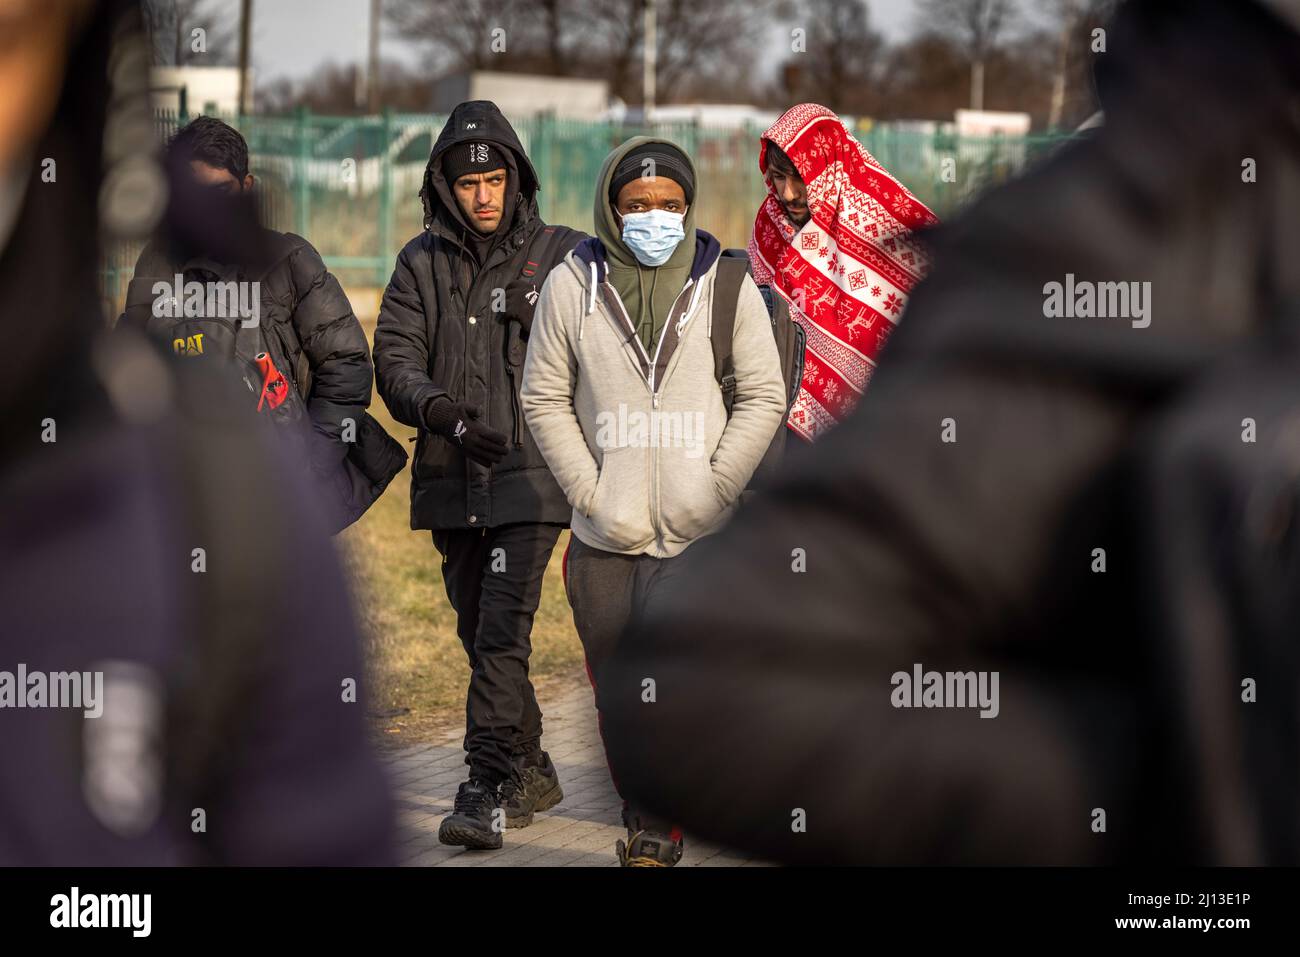 Arrival of PUC refugees from Ukraine at the Polish-Ukrainian border crossing in Medyka. People without Ukrainian passports were processed separately. In long lines and bitter cold, they had to wait for days to enter Poland. On the Polish side, however, their onward journey was delayed by buses to large sites or collective shelters. Stock Photo